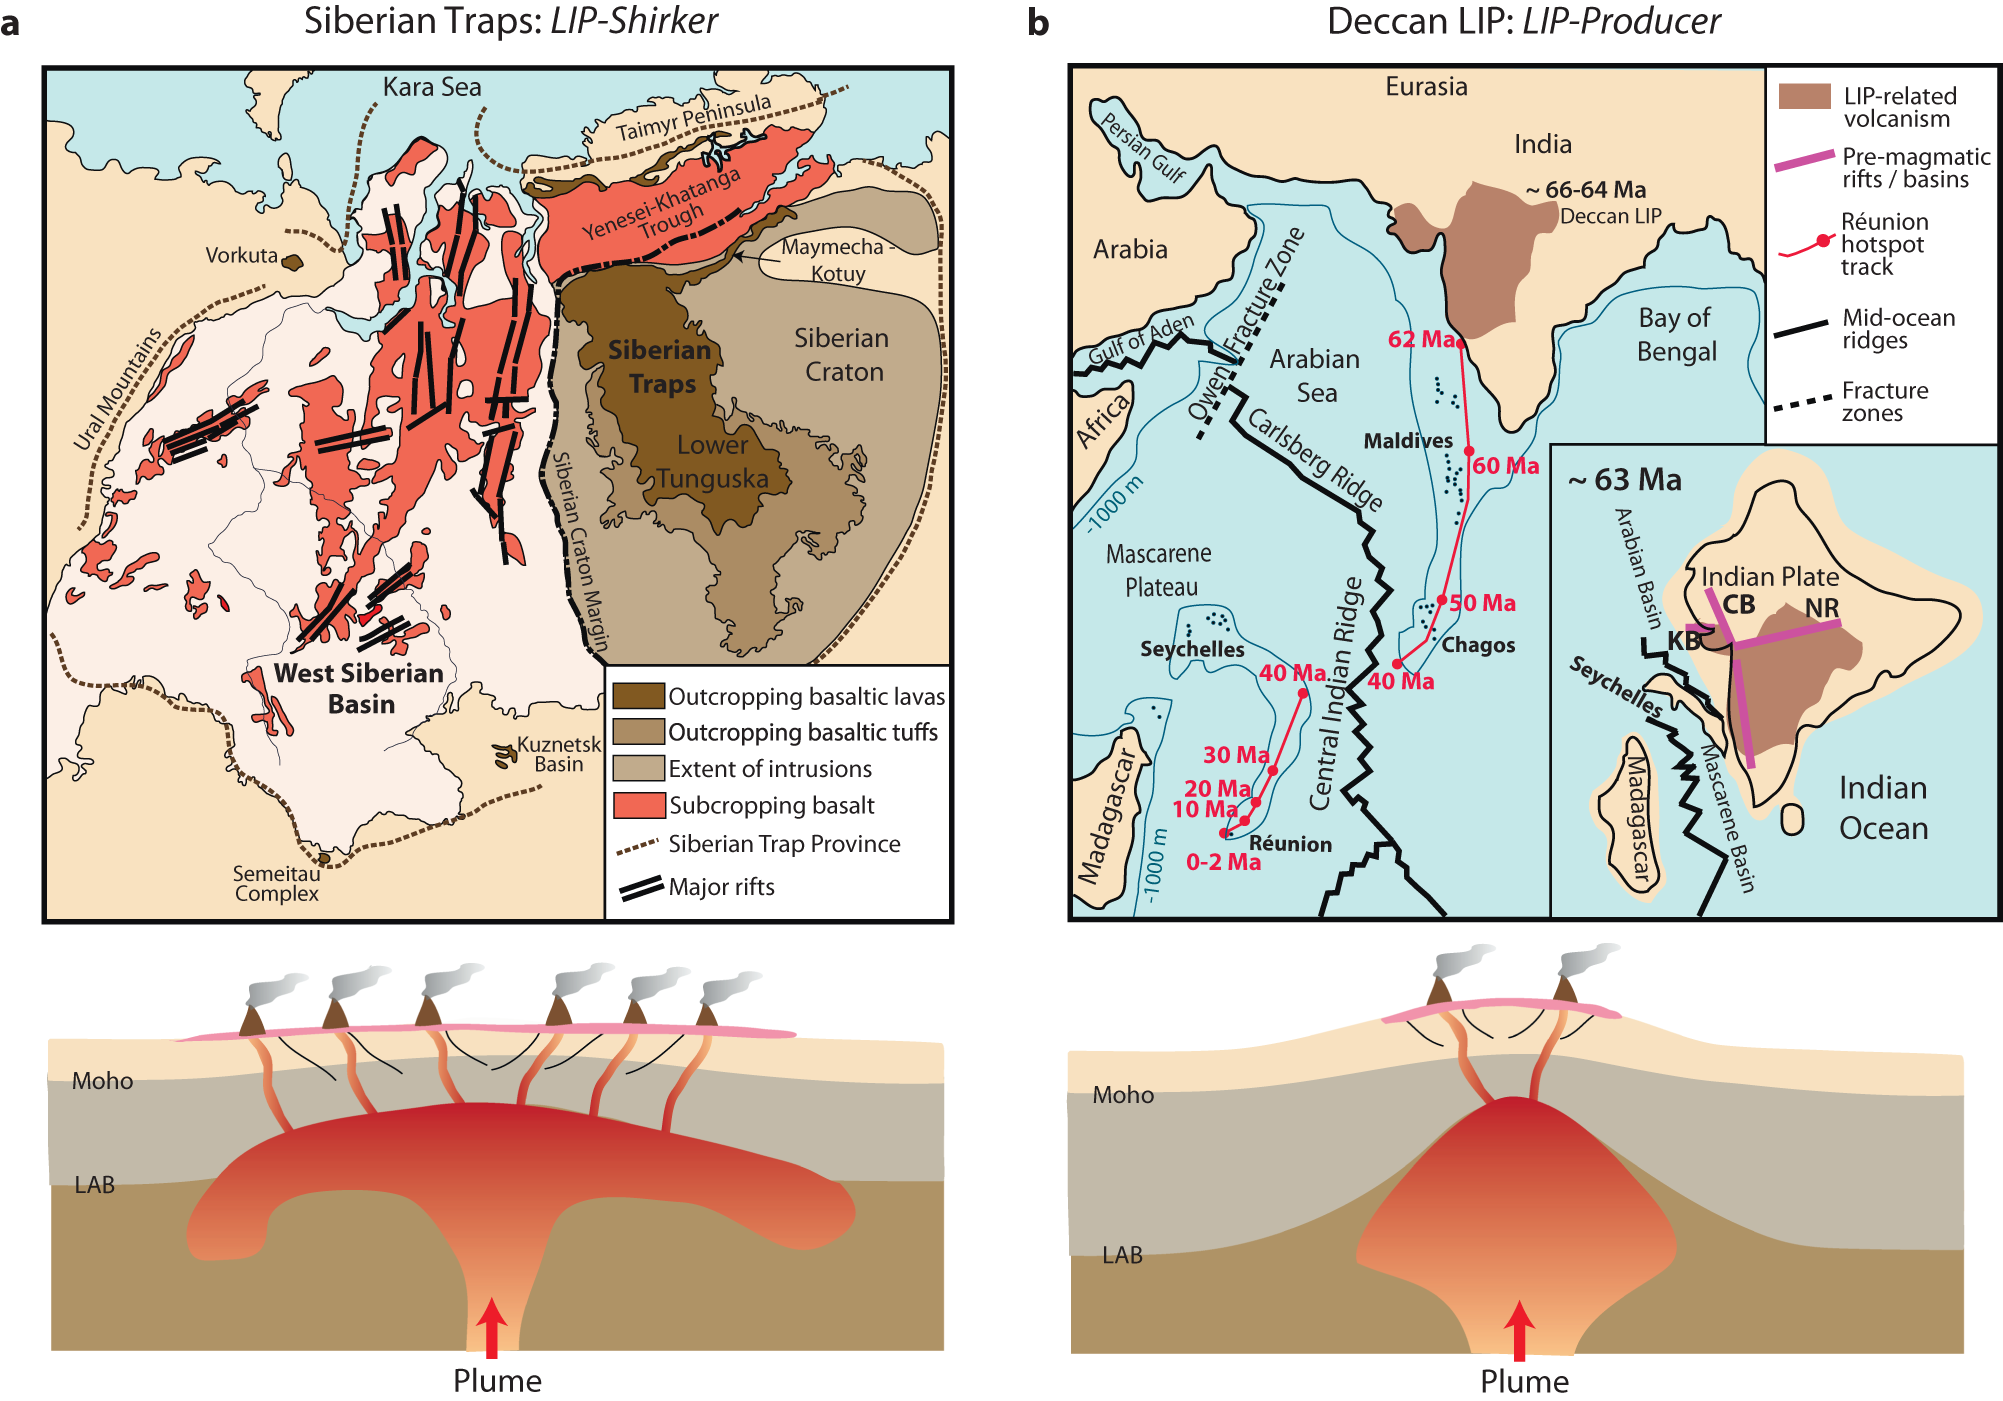 Role of Large Igneous Provinces in continental break-up varying